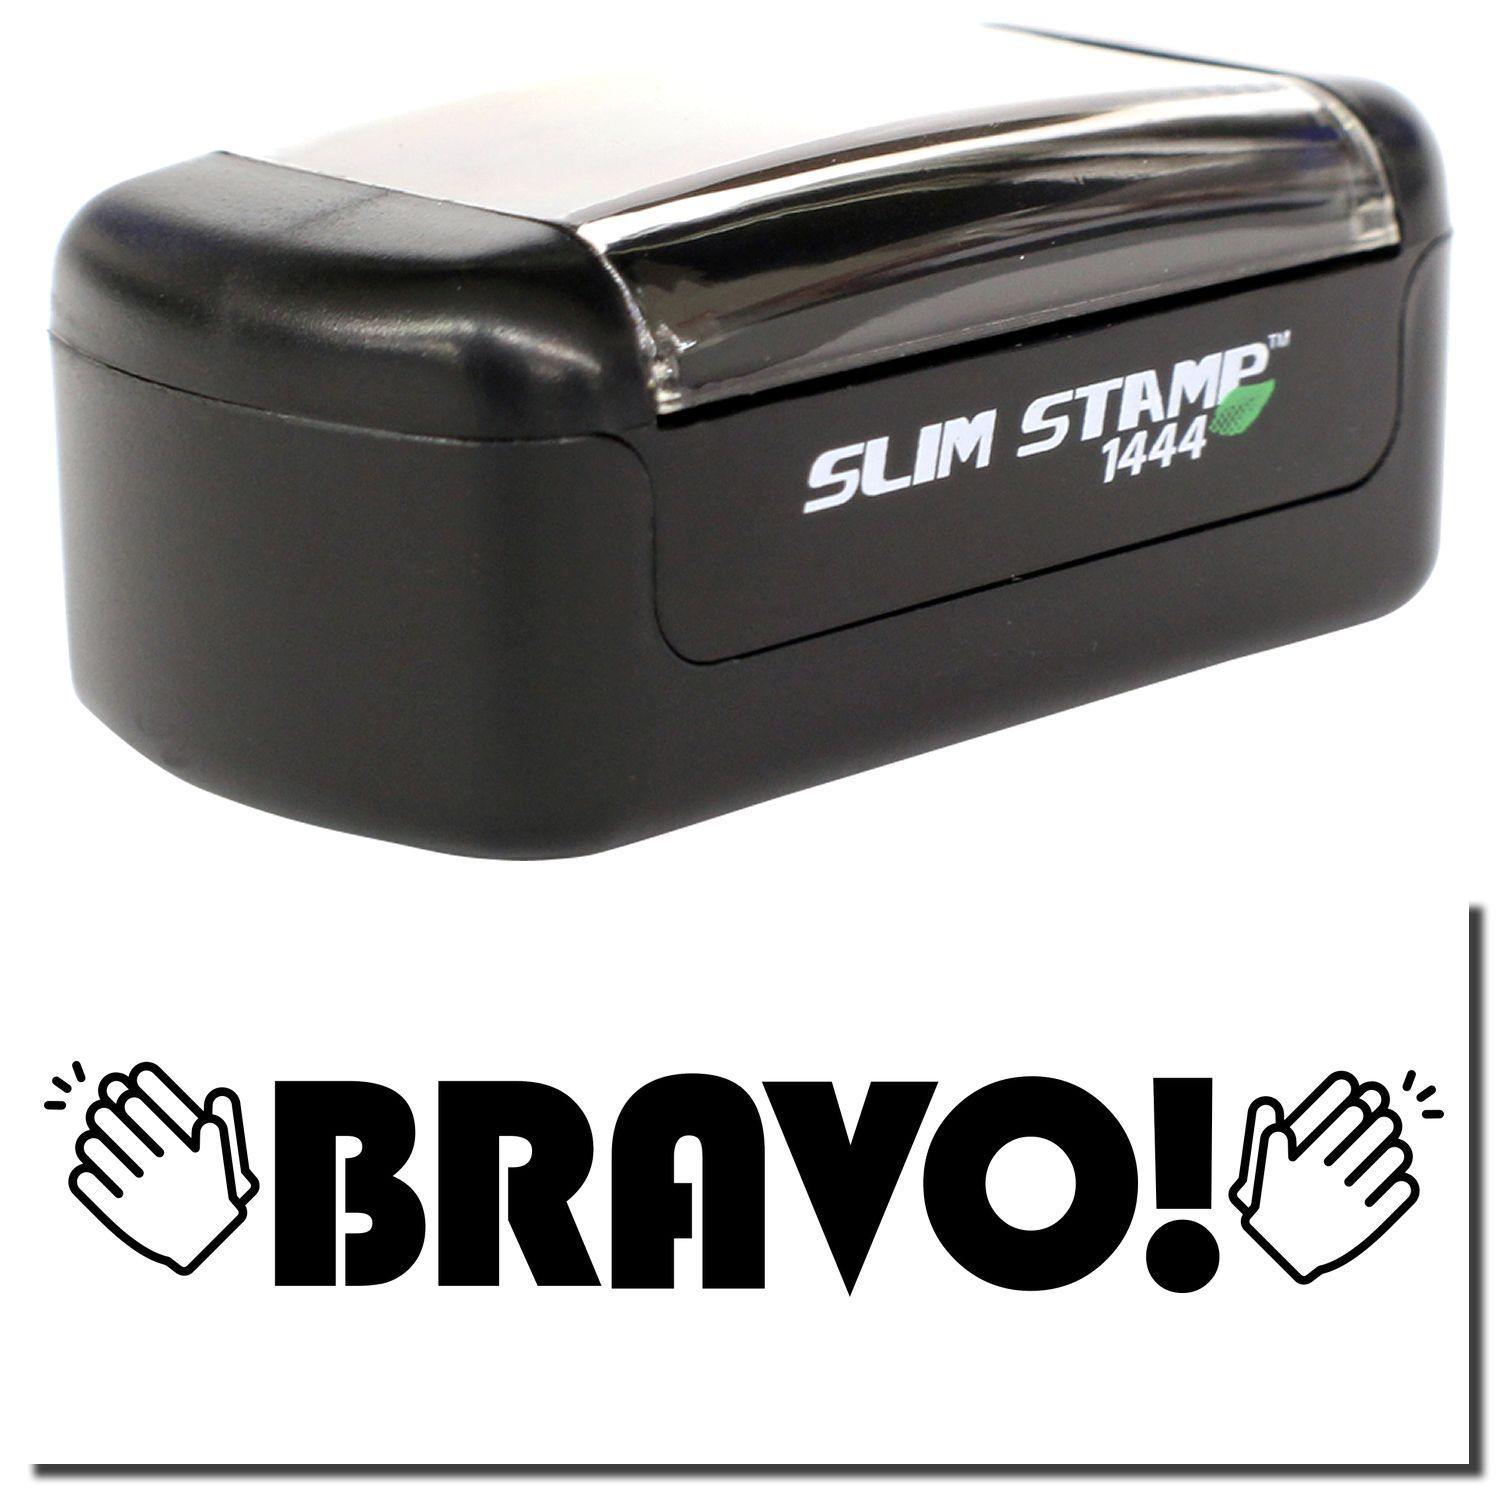 A stock office pre-inked stamp with a stamped image showing how the text "BRAVO!" with clapping hands on both sides of the text is displayed after stamping.